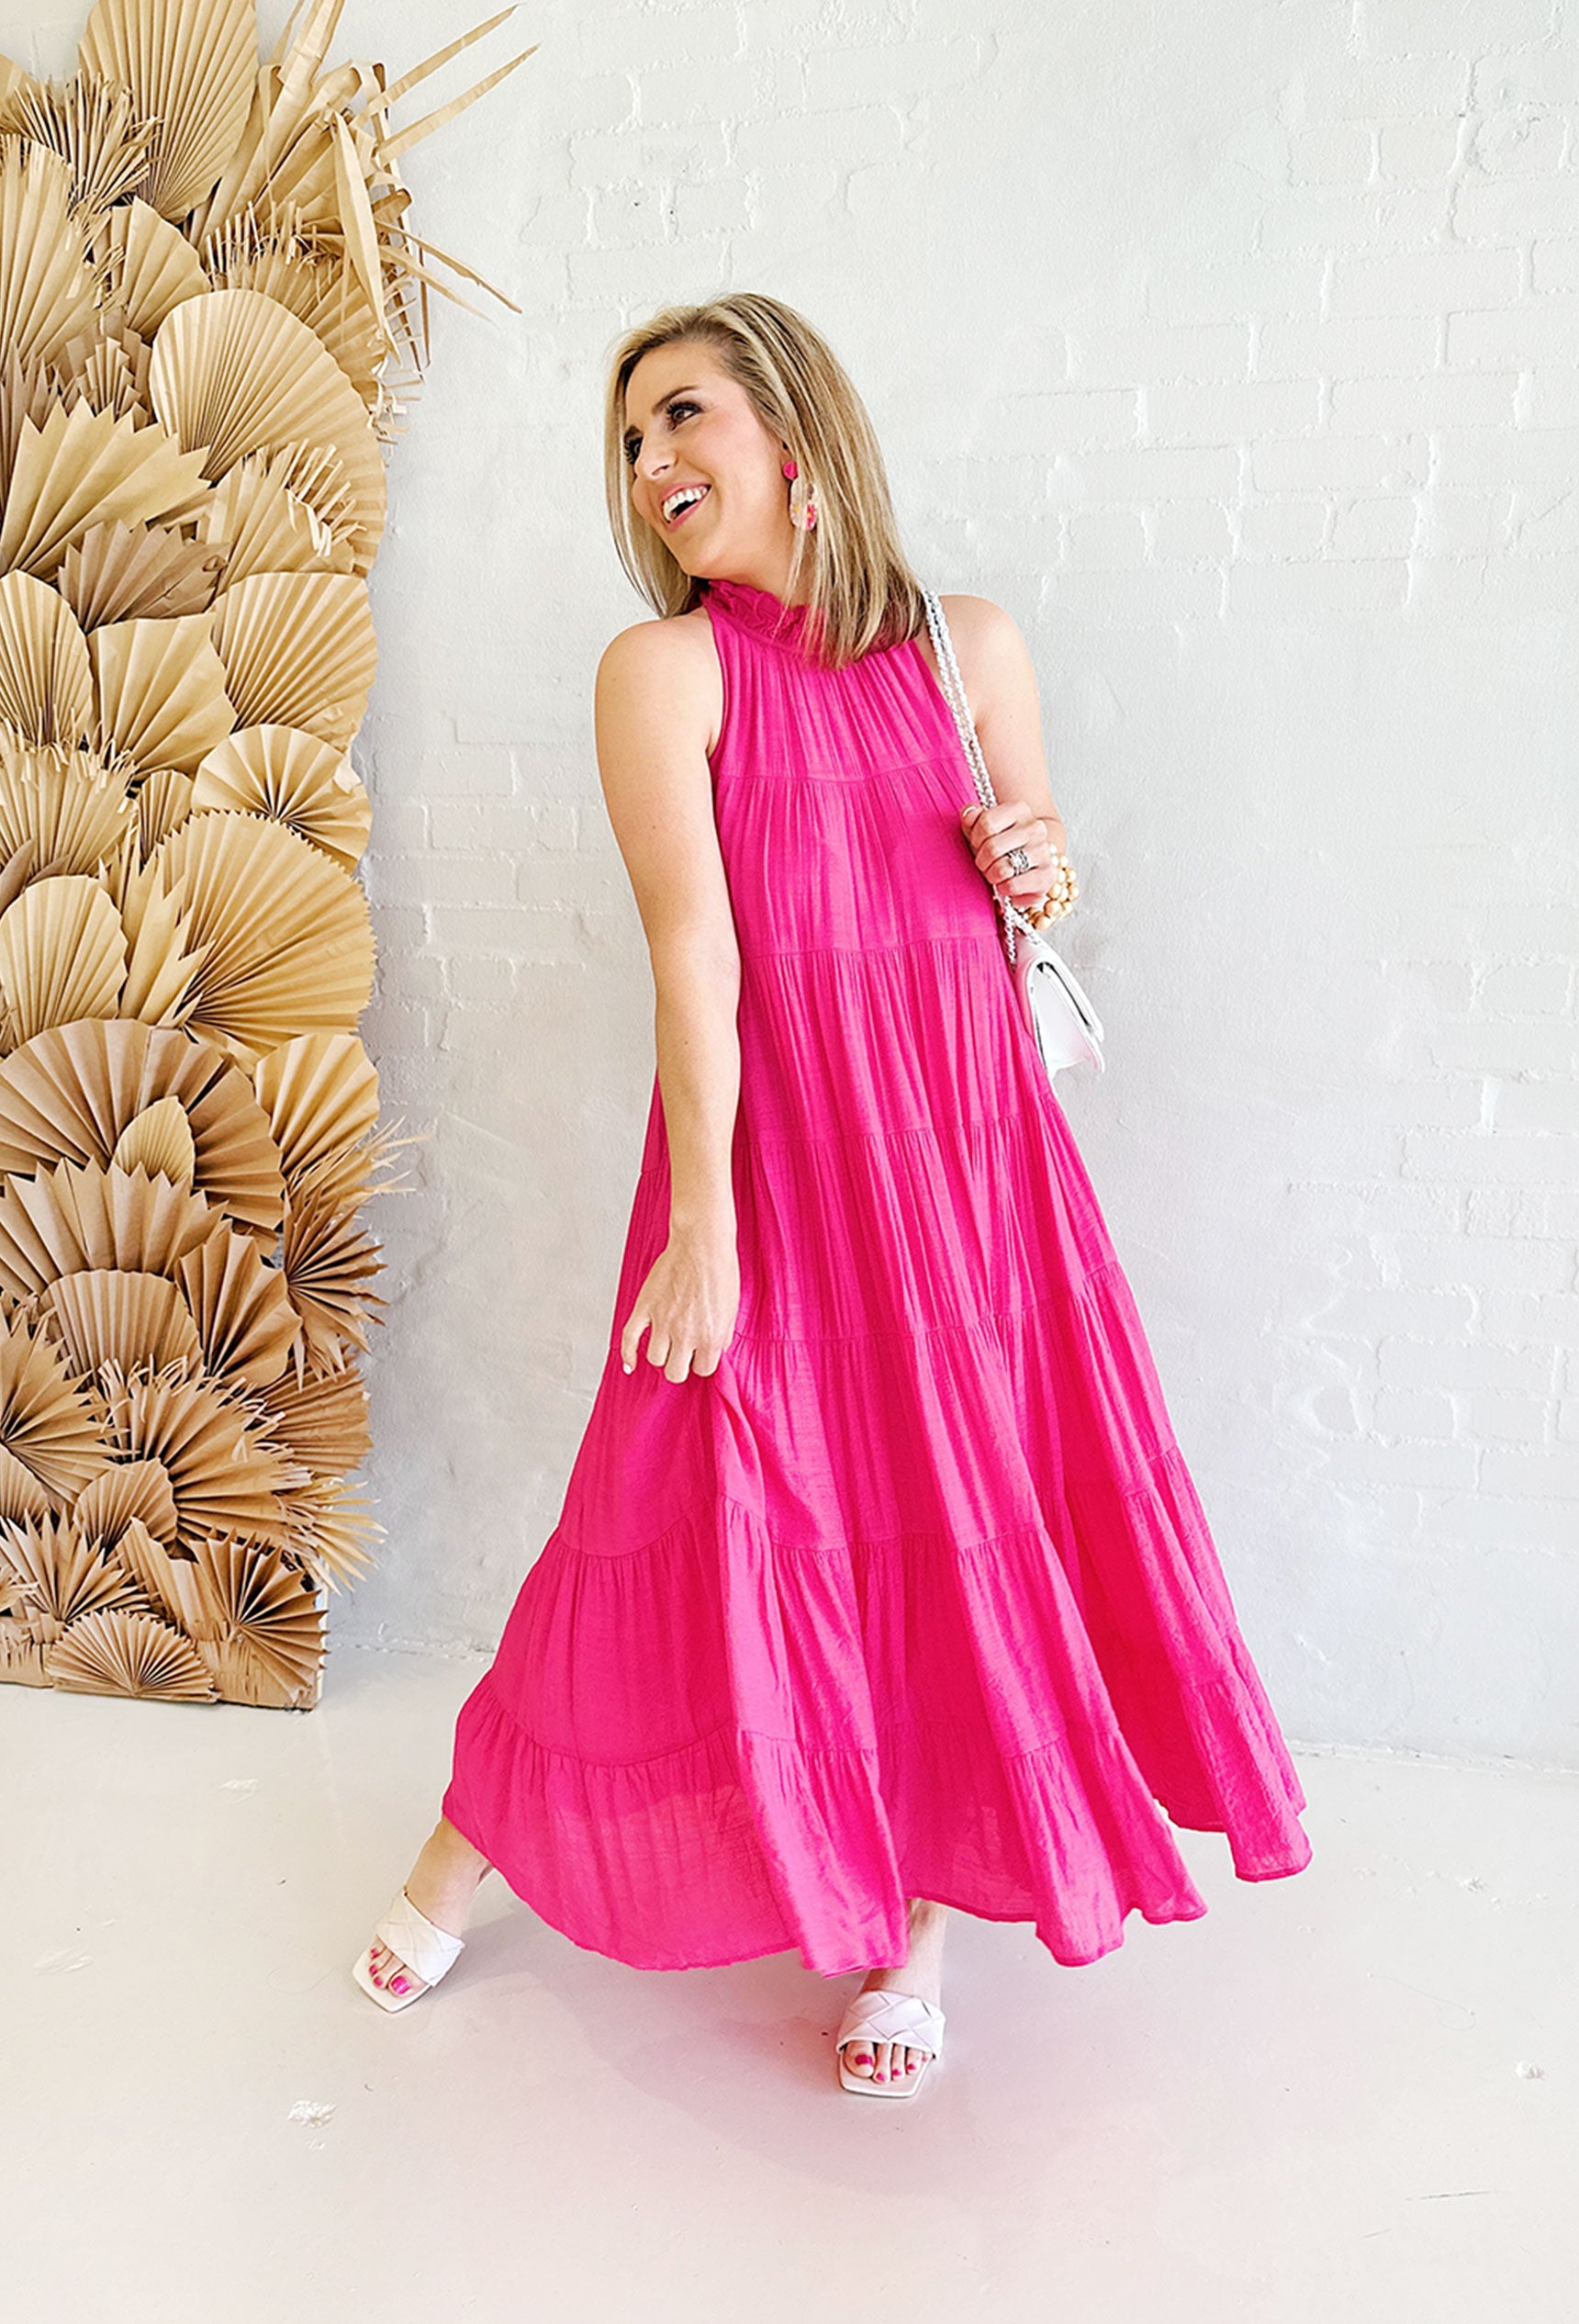 Lisbeth Pink Tiered Maxi Dress, pink tiered dress with high neck and self tie detail in the back